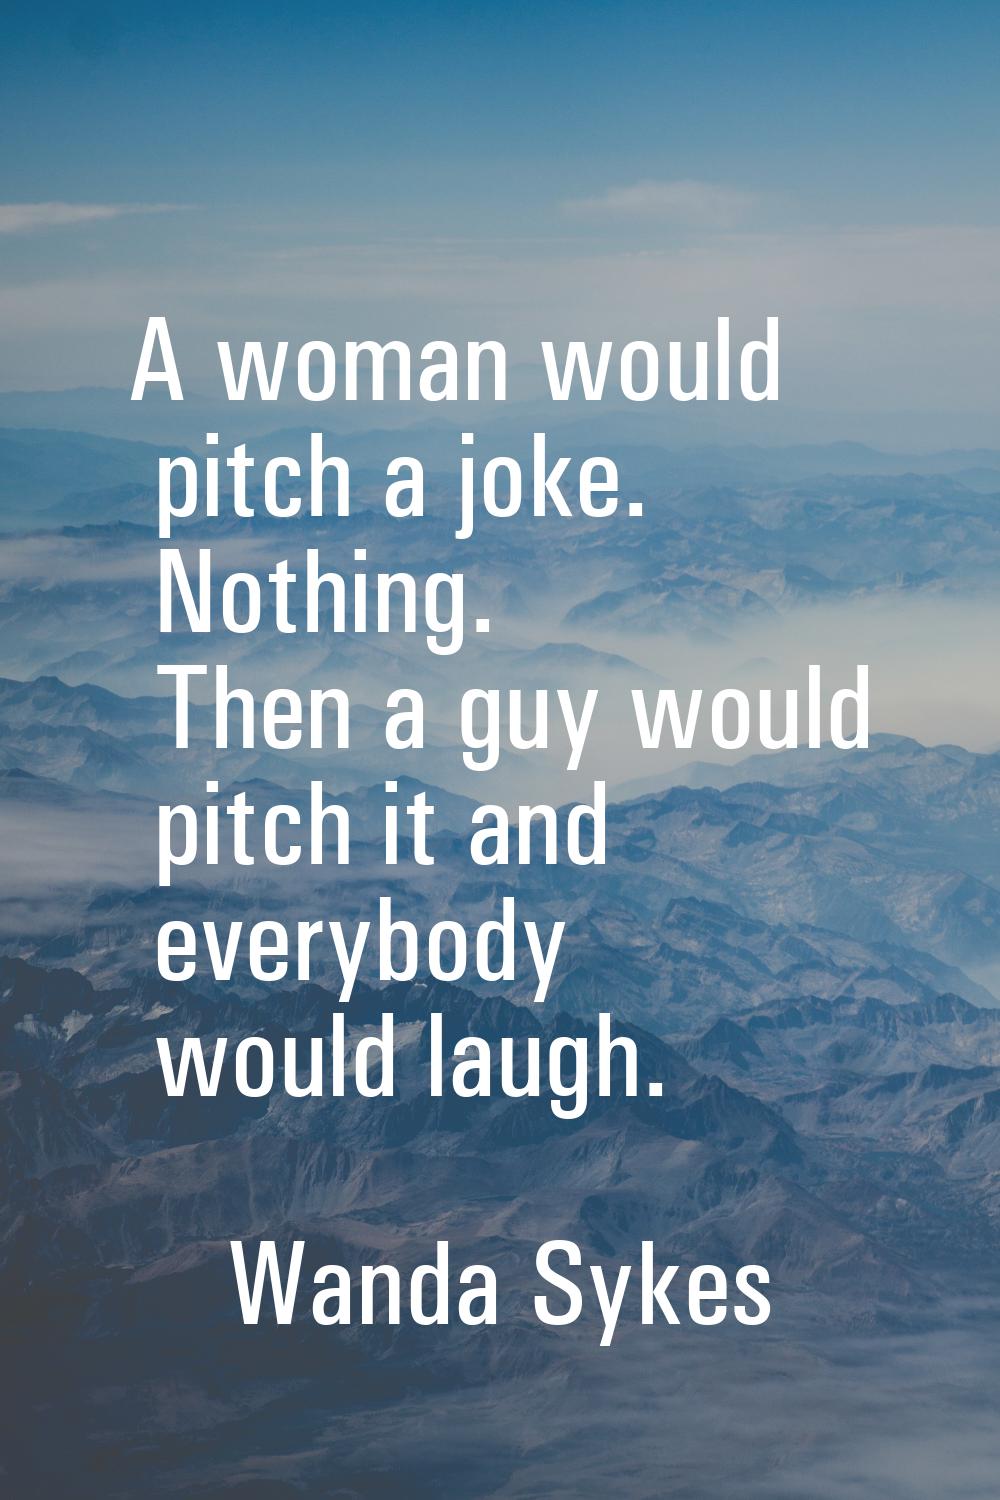 A woman would pitch a joke. Nothing. Then a guy would pitch it and everybody would laugh.